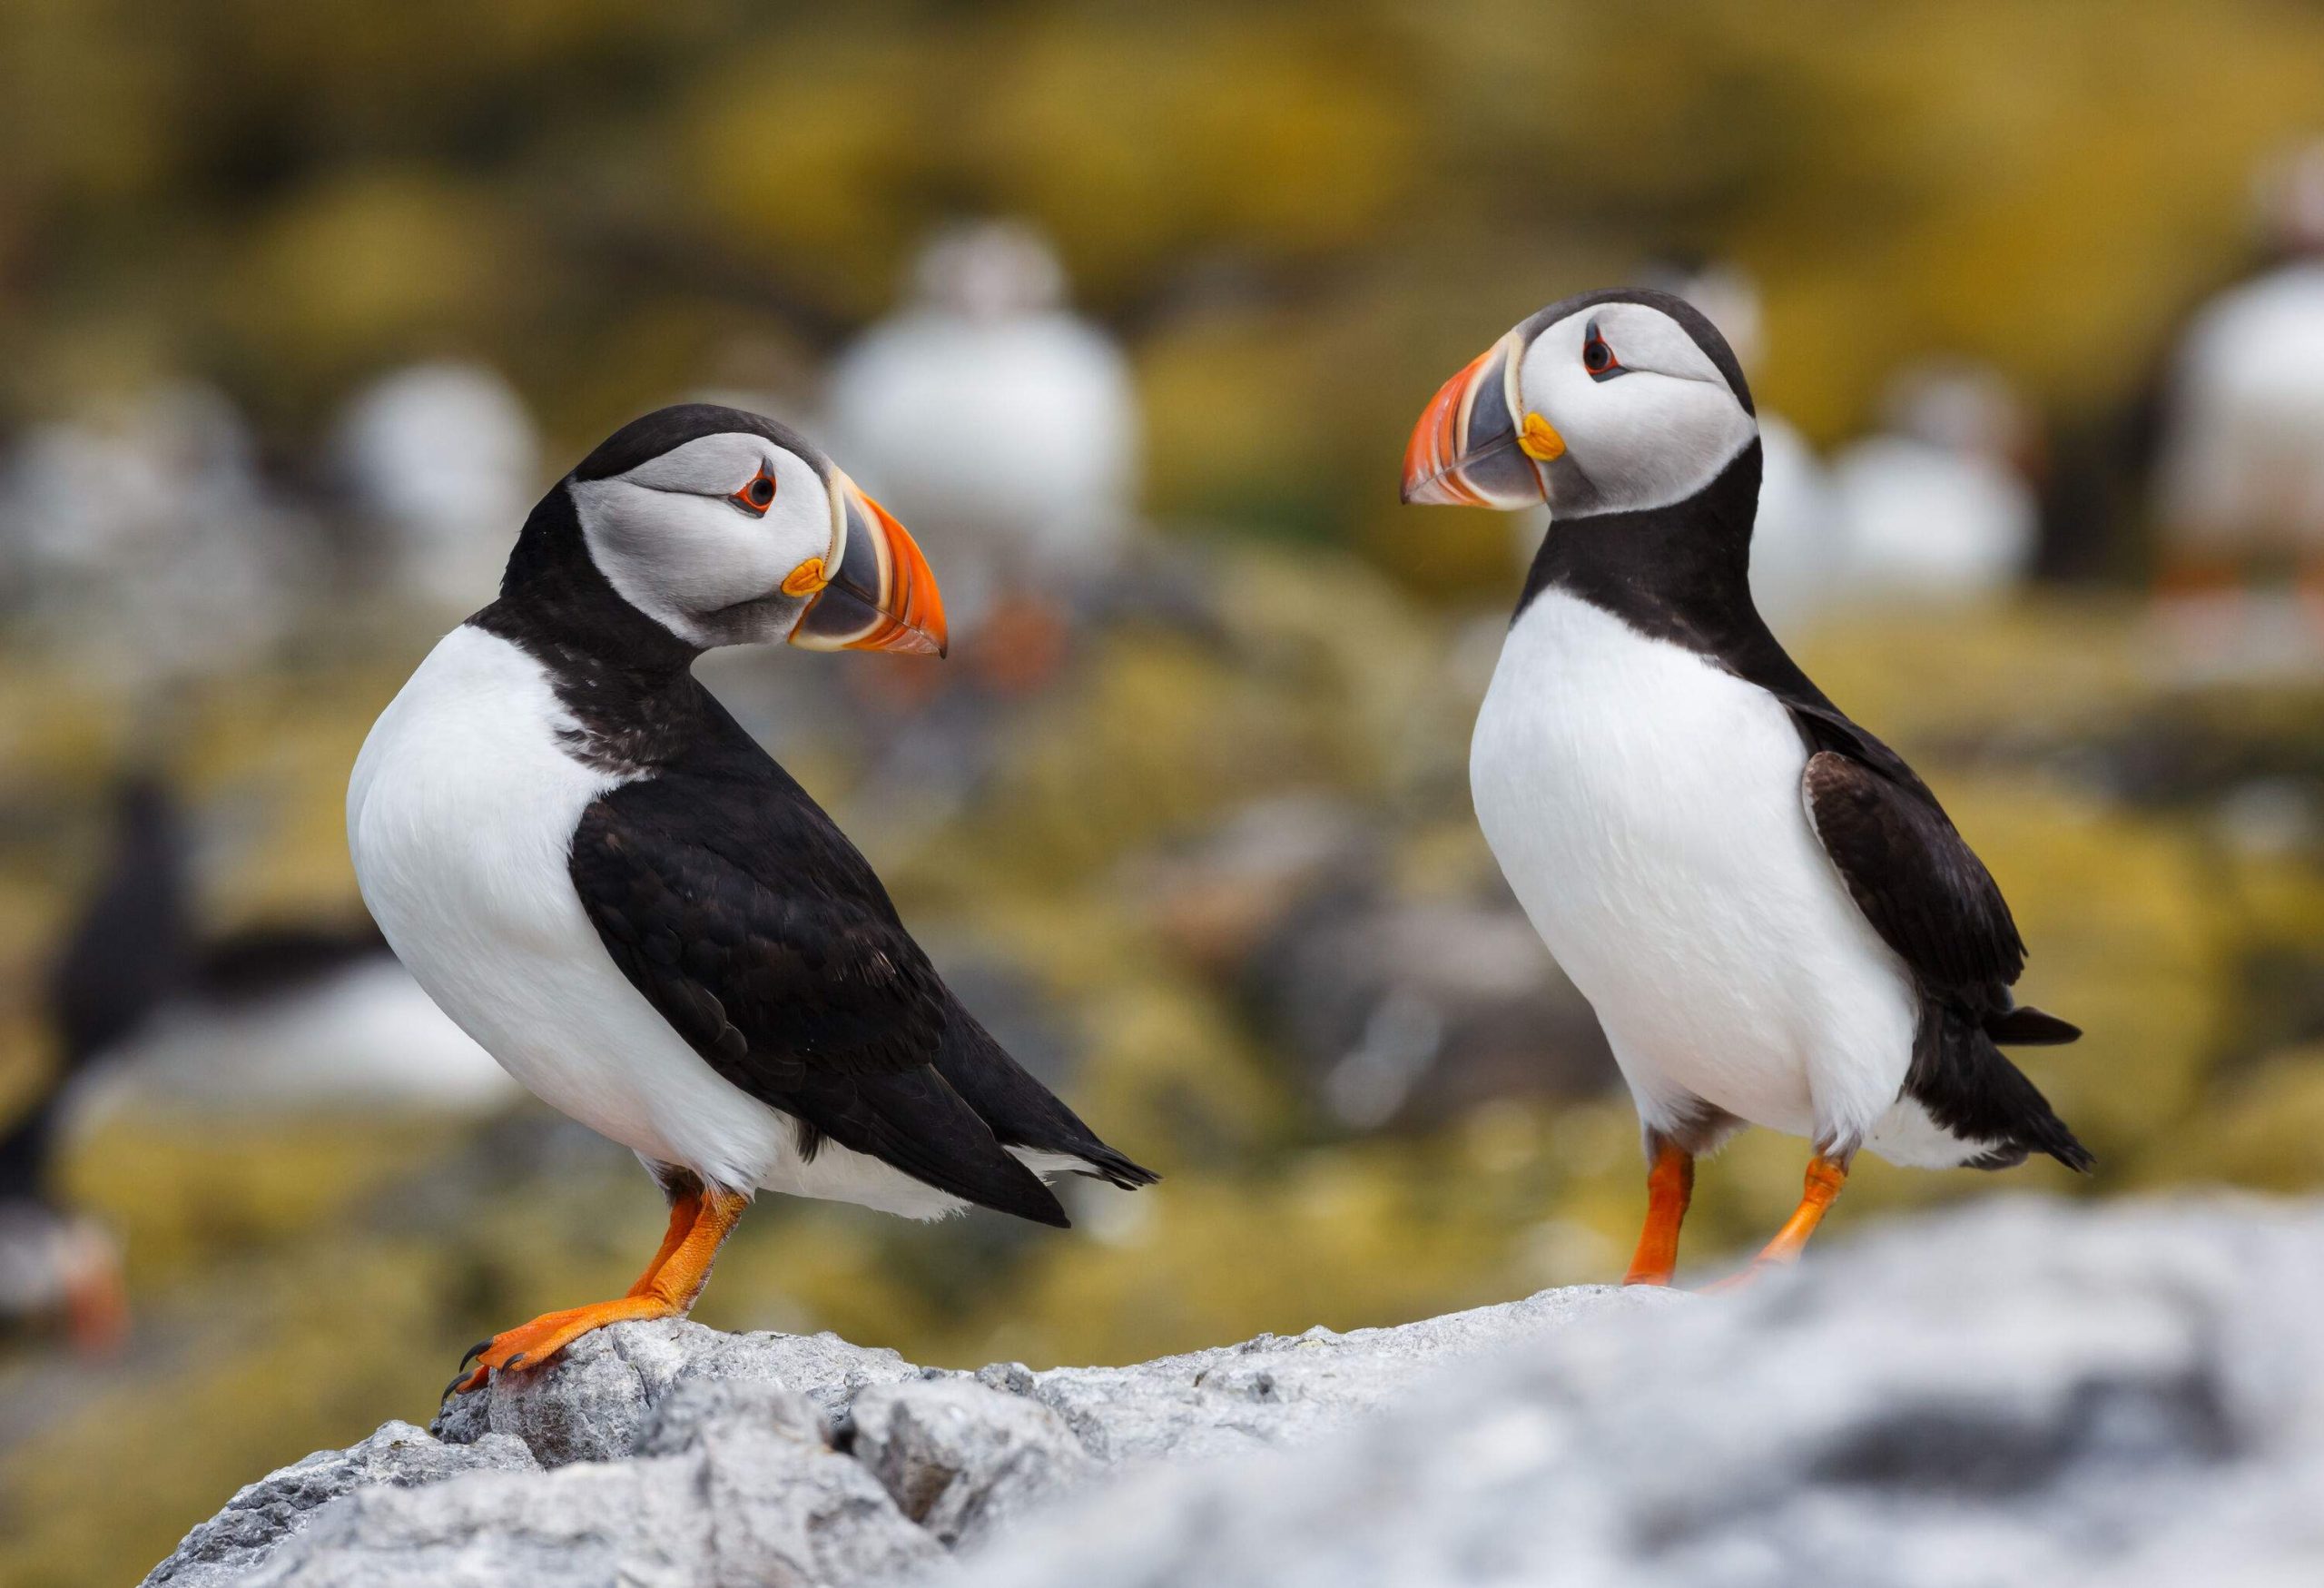 Two puffin birds with colourful beaks perched on a rock.